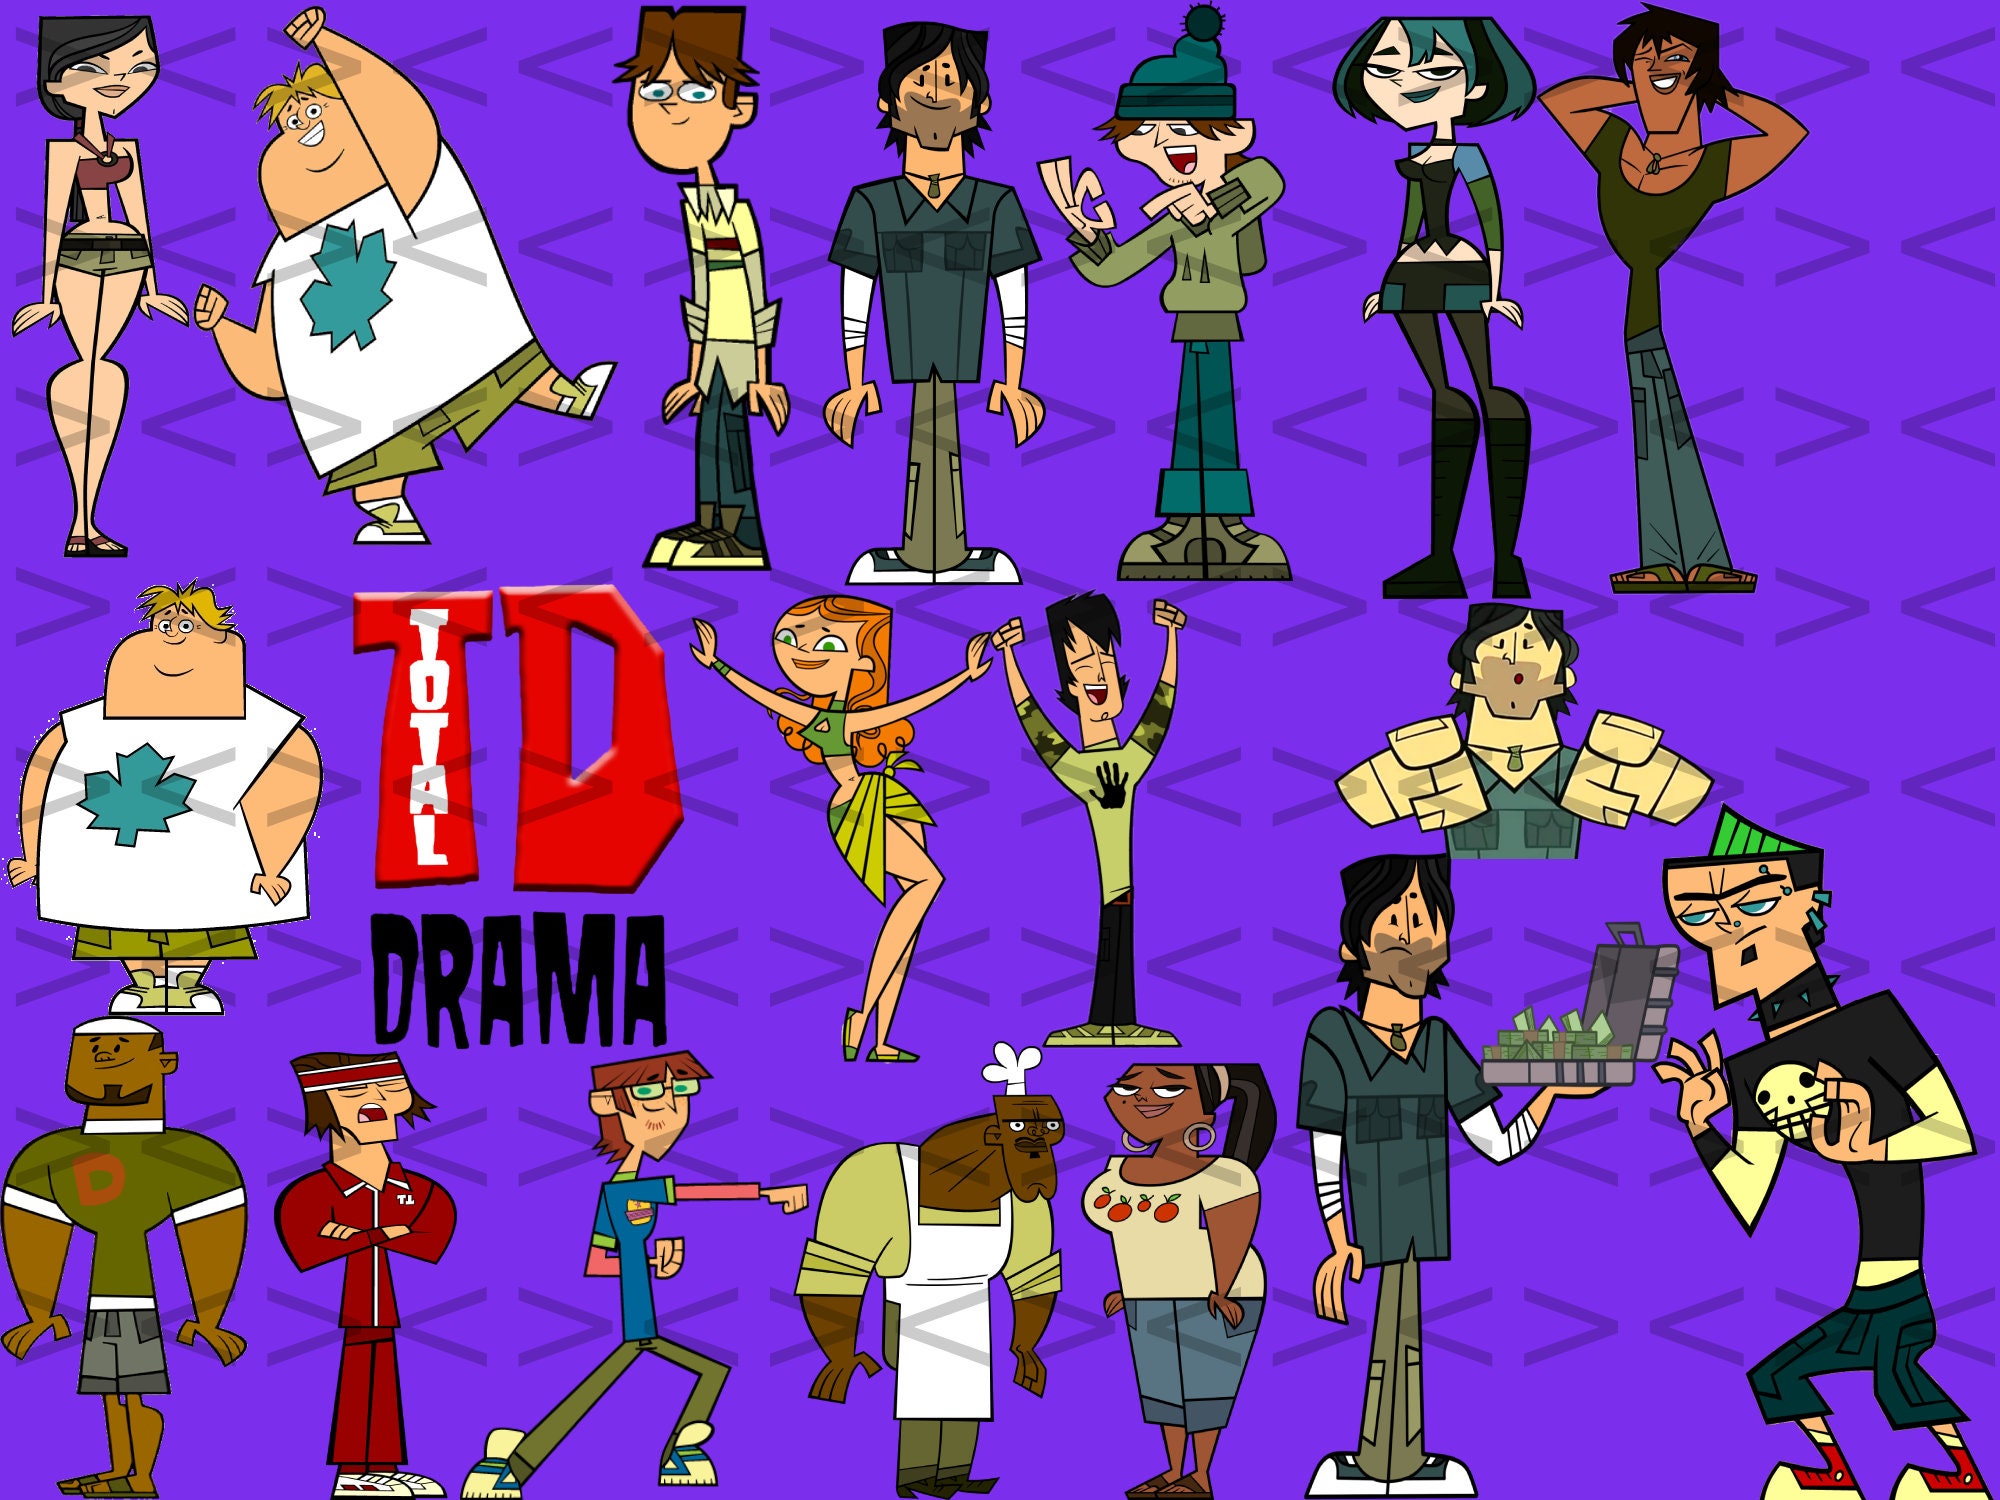 Total Drama Ridonculous Race Gifts & Merchandise for Sale